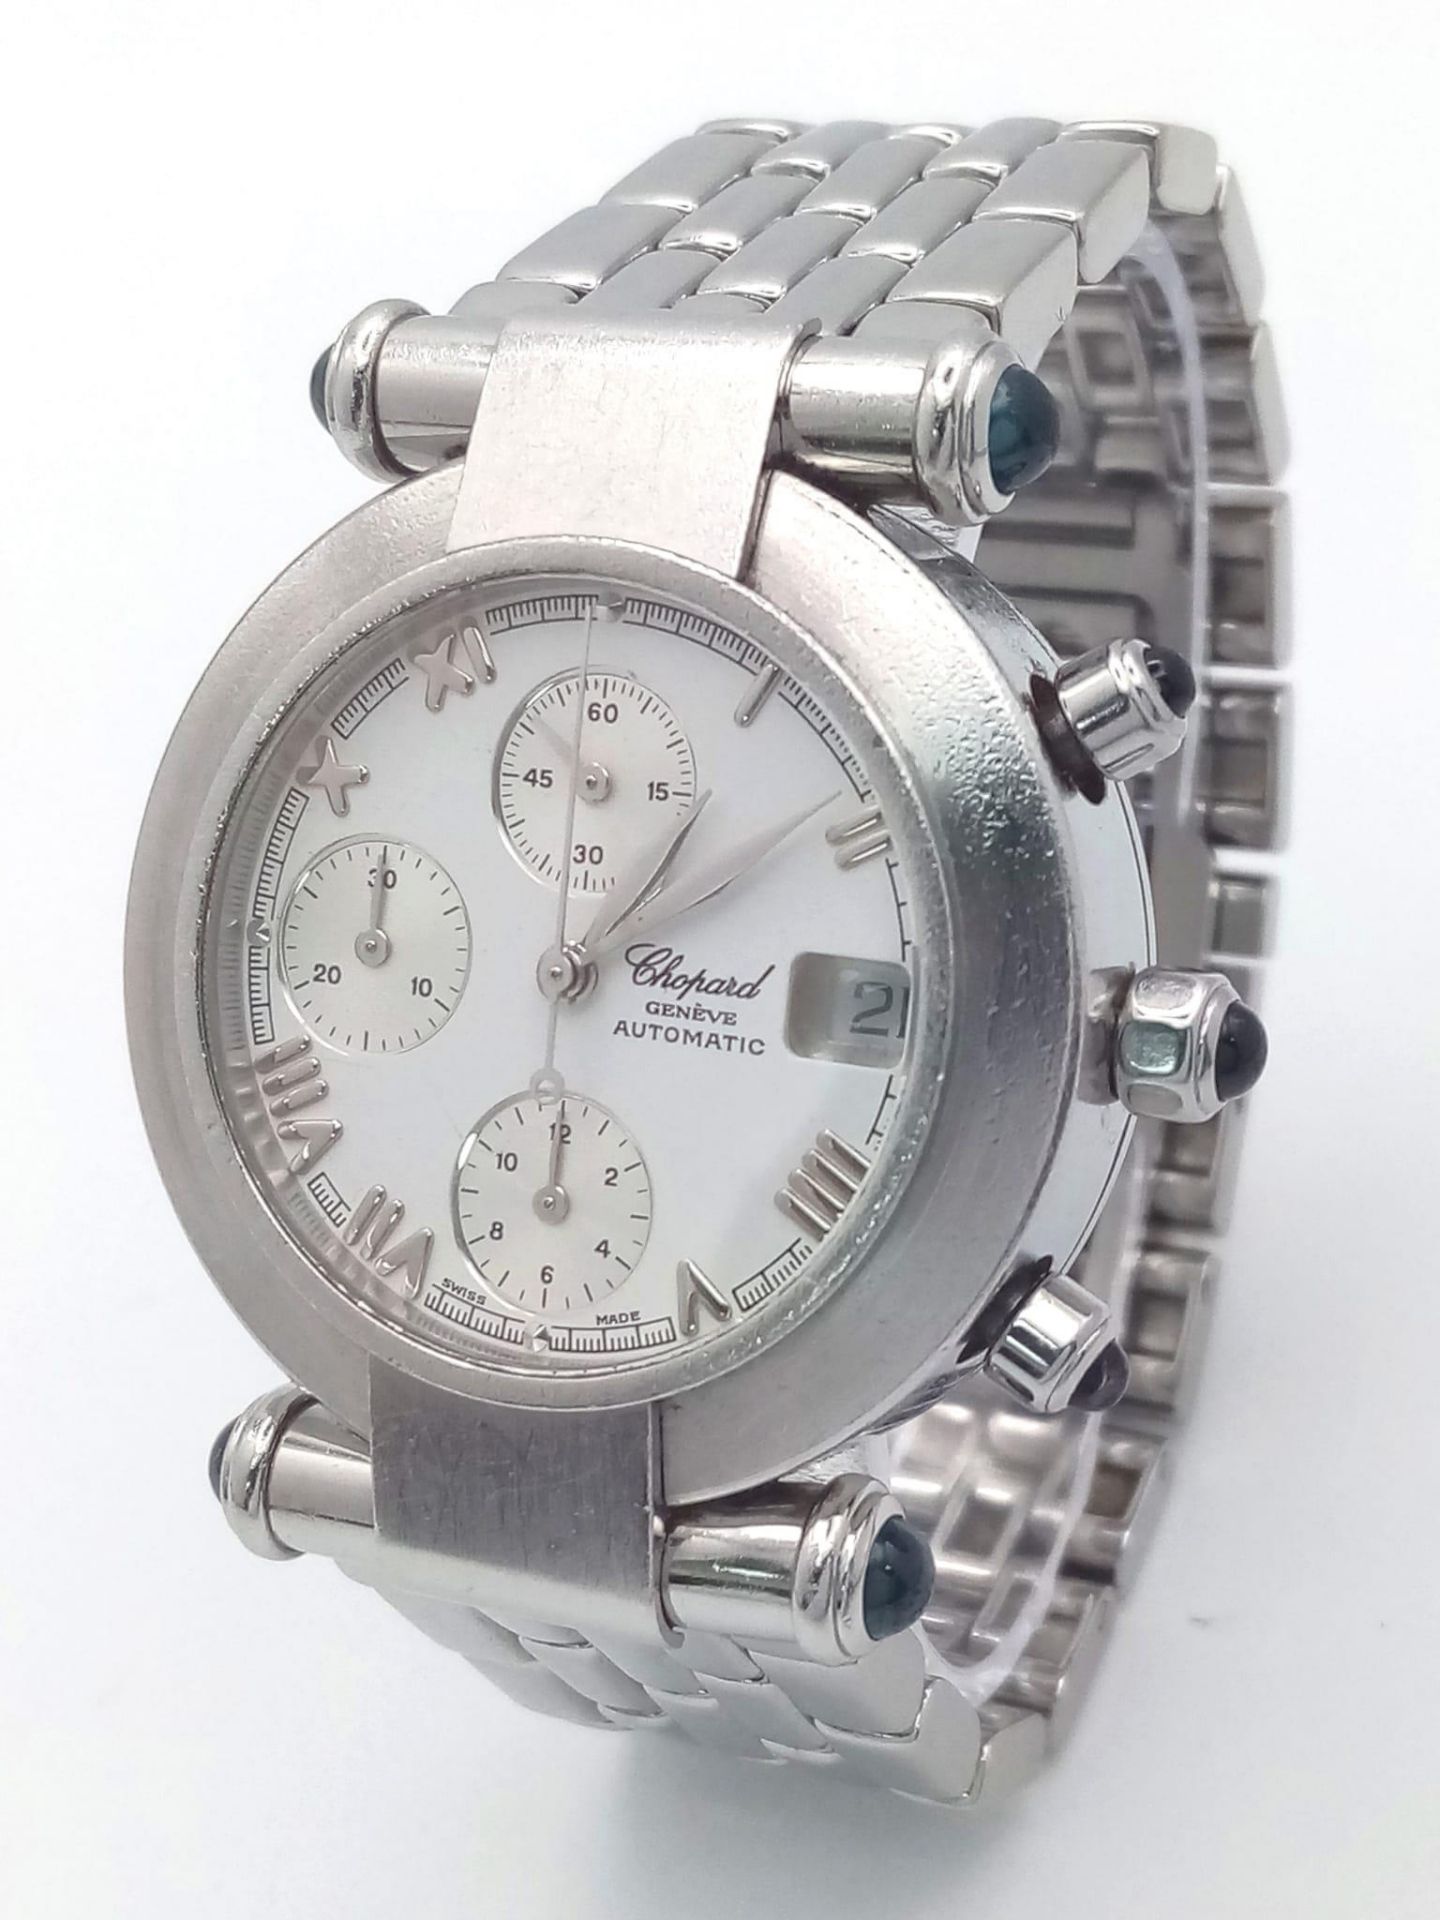 A Chopard Automatic Chronograph Gents Watch. Stainless steel bracelet and case - 37mm. White dial - Image 2 of 8